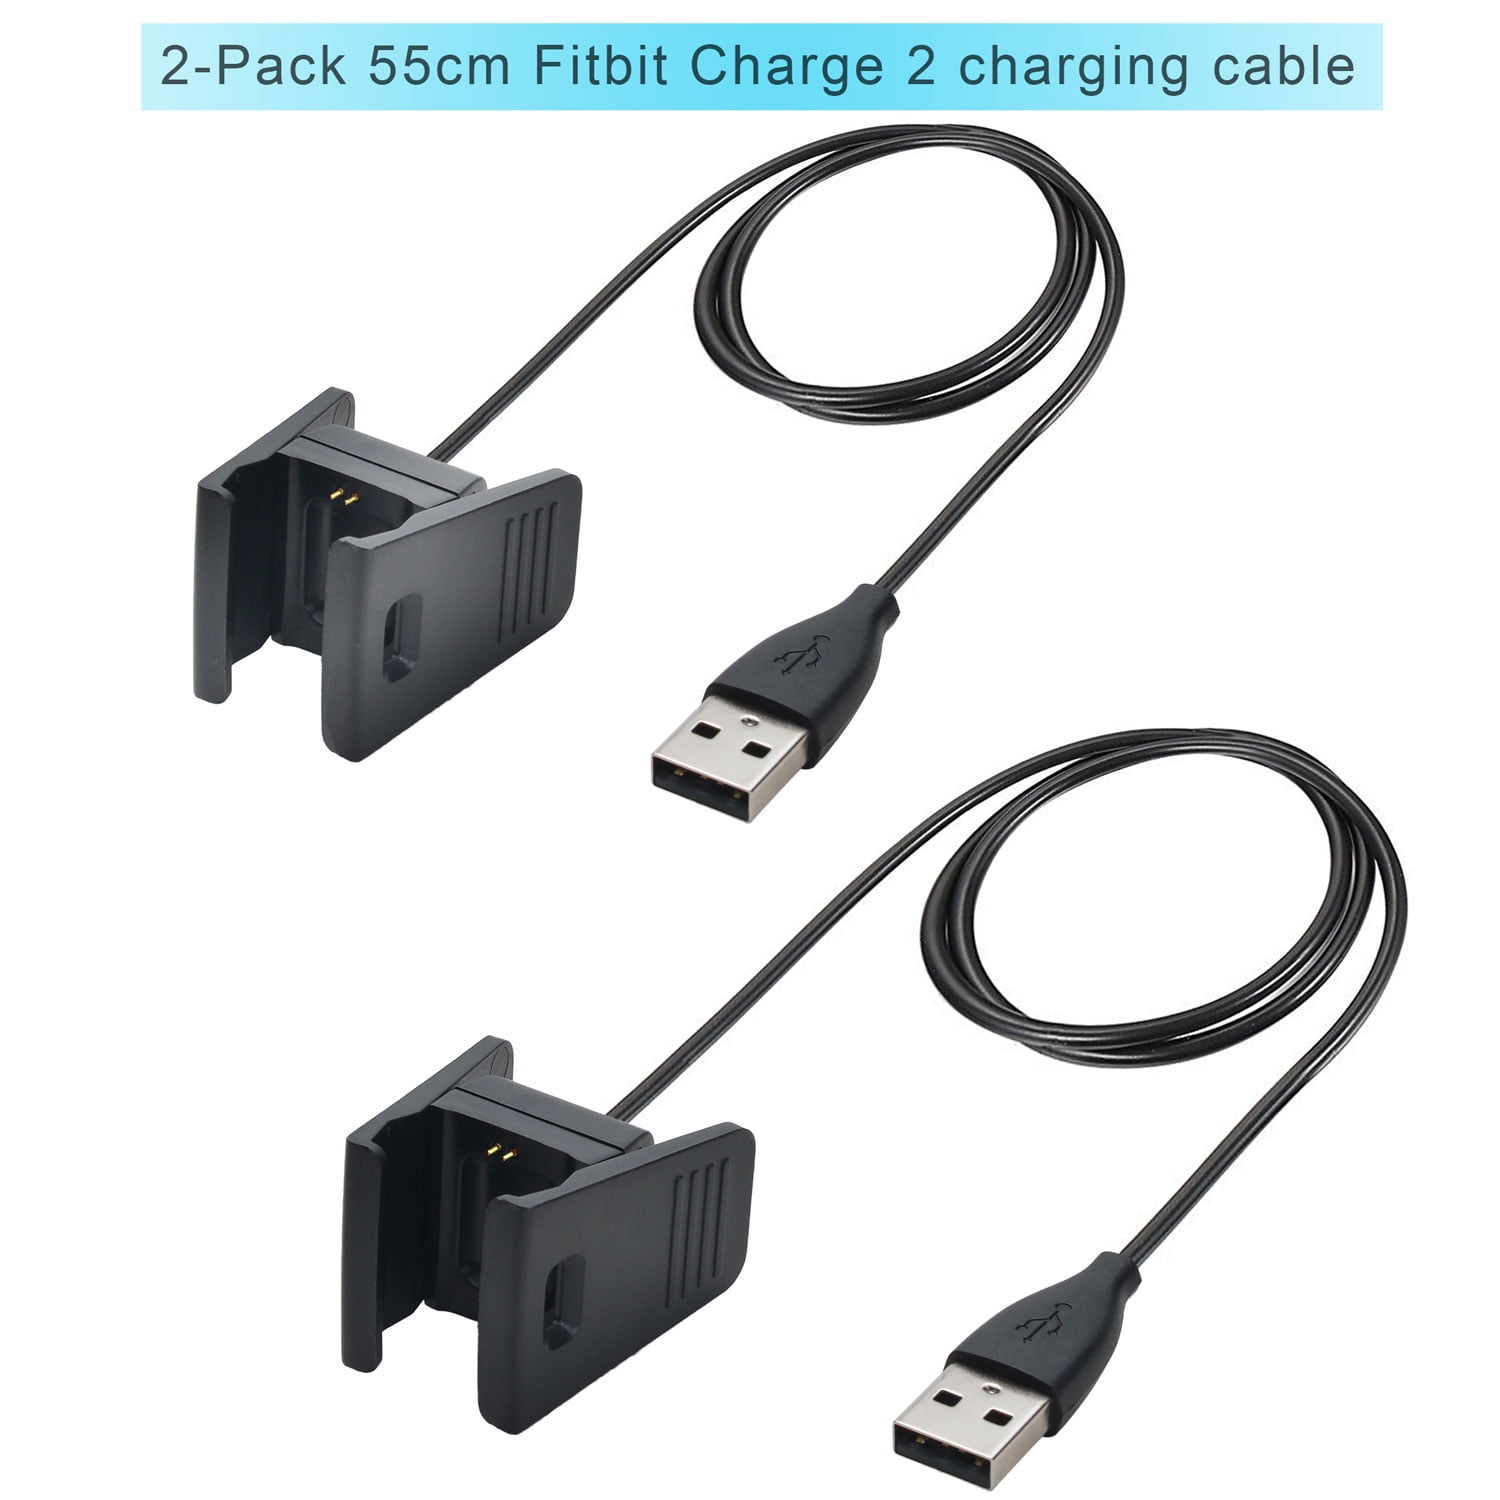 fitbit charge 2 charger walmart